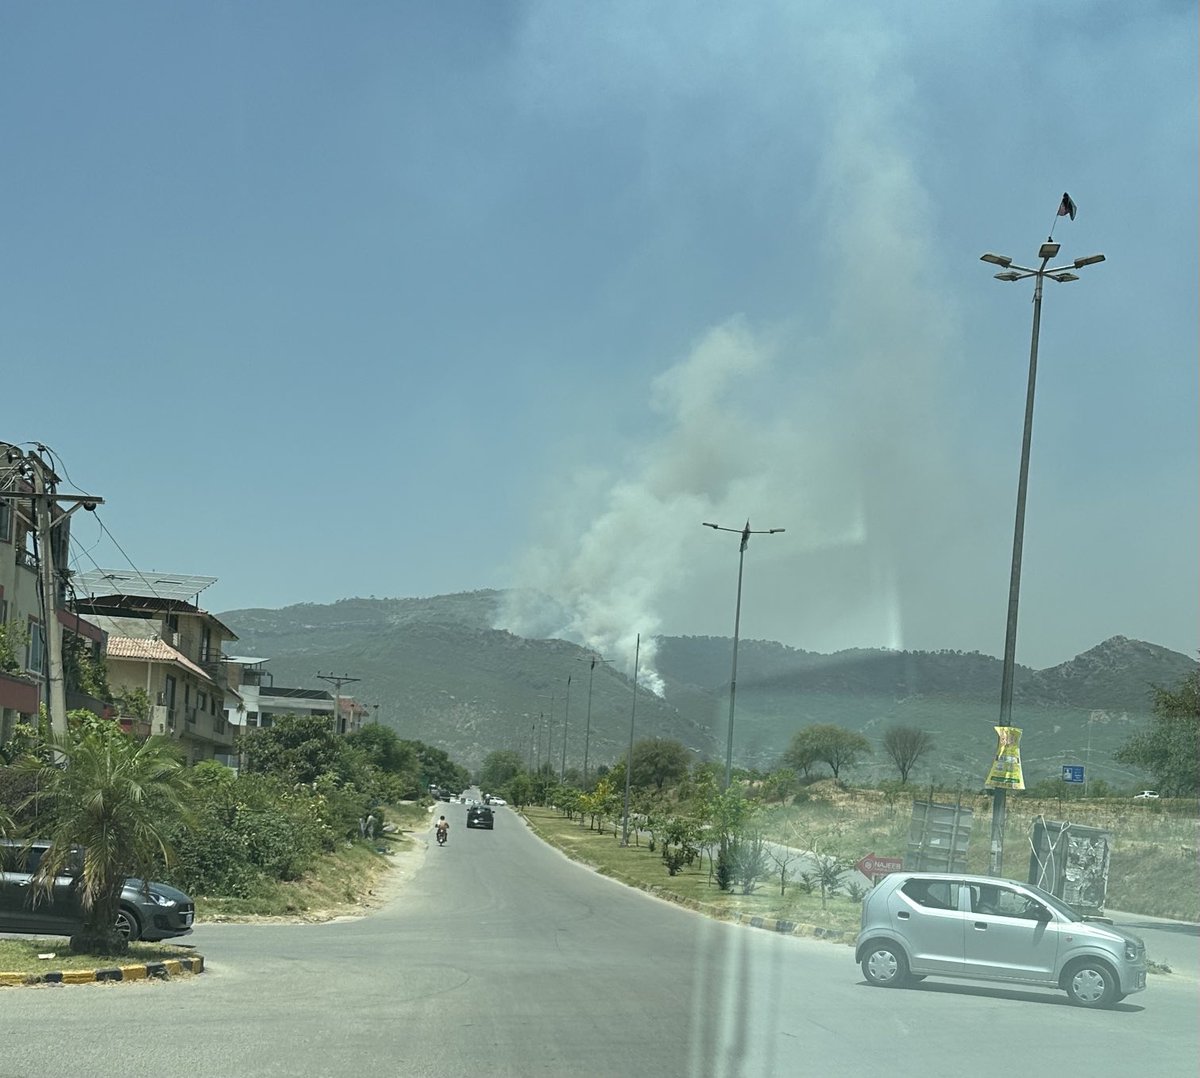 Margalla hills near Islamabad again on fire. Some people are intentionally using fire to steal wood.